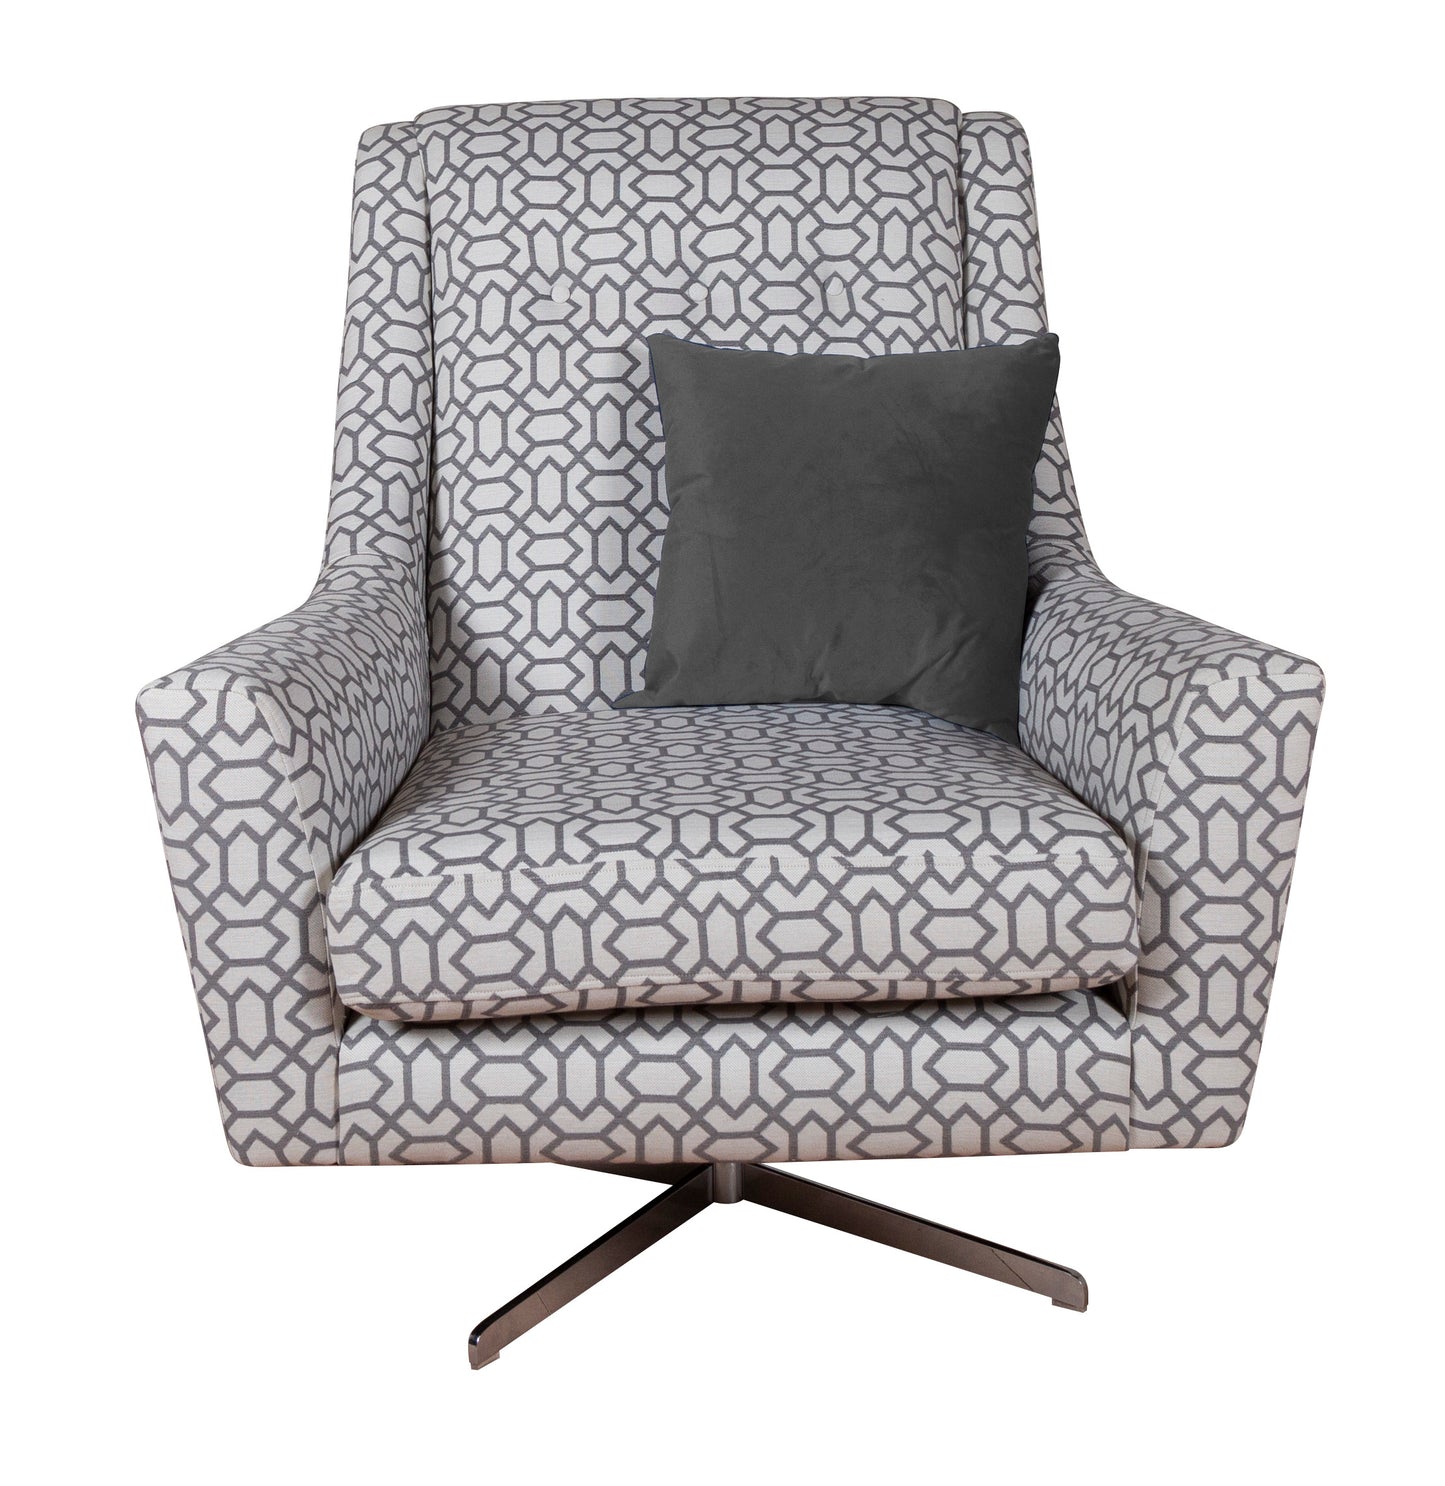 Chic Salute Patterned Swivel Accent Chair